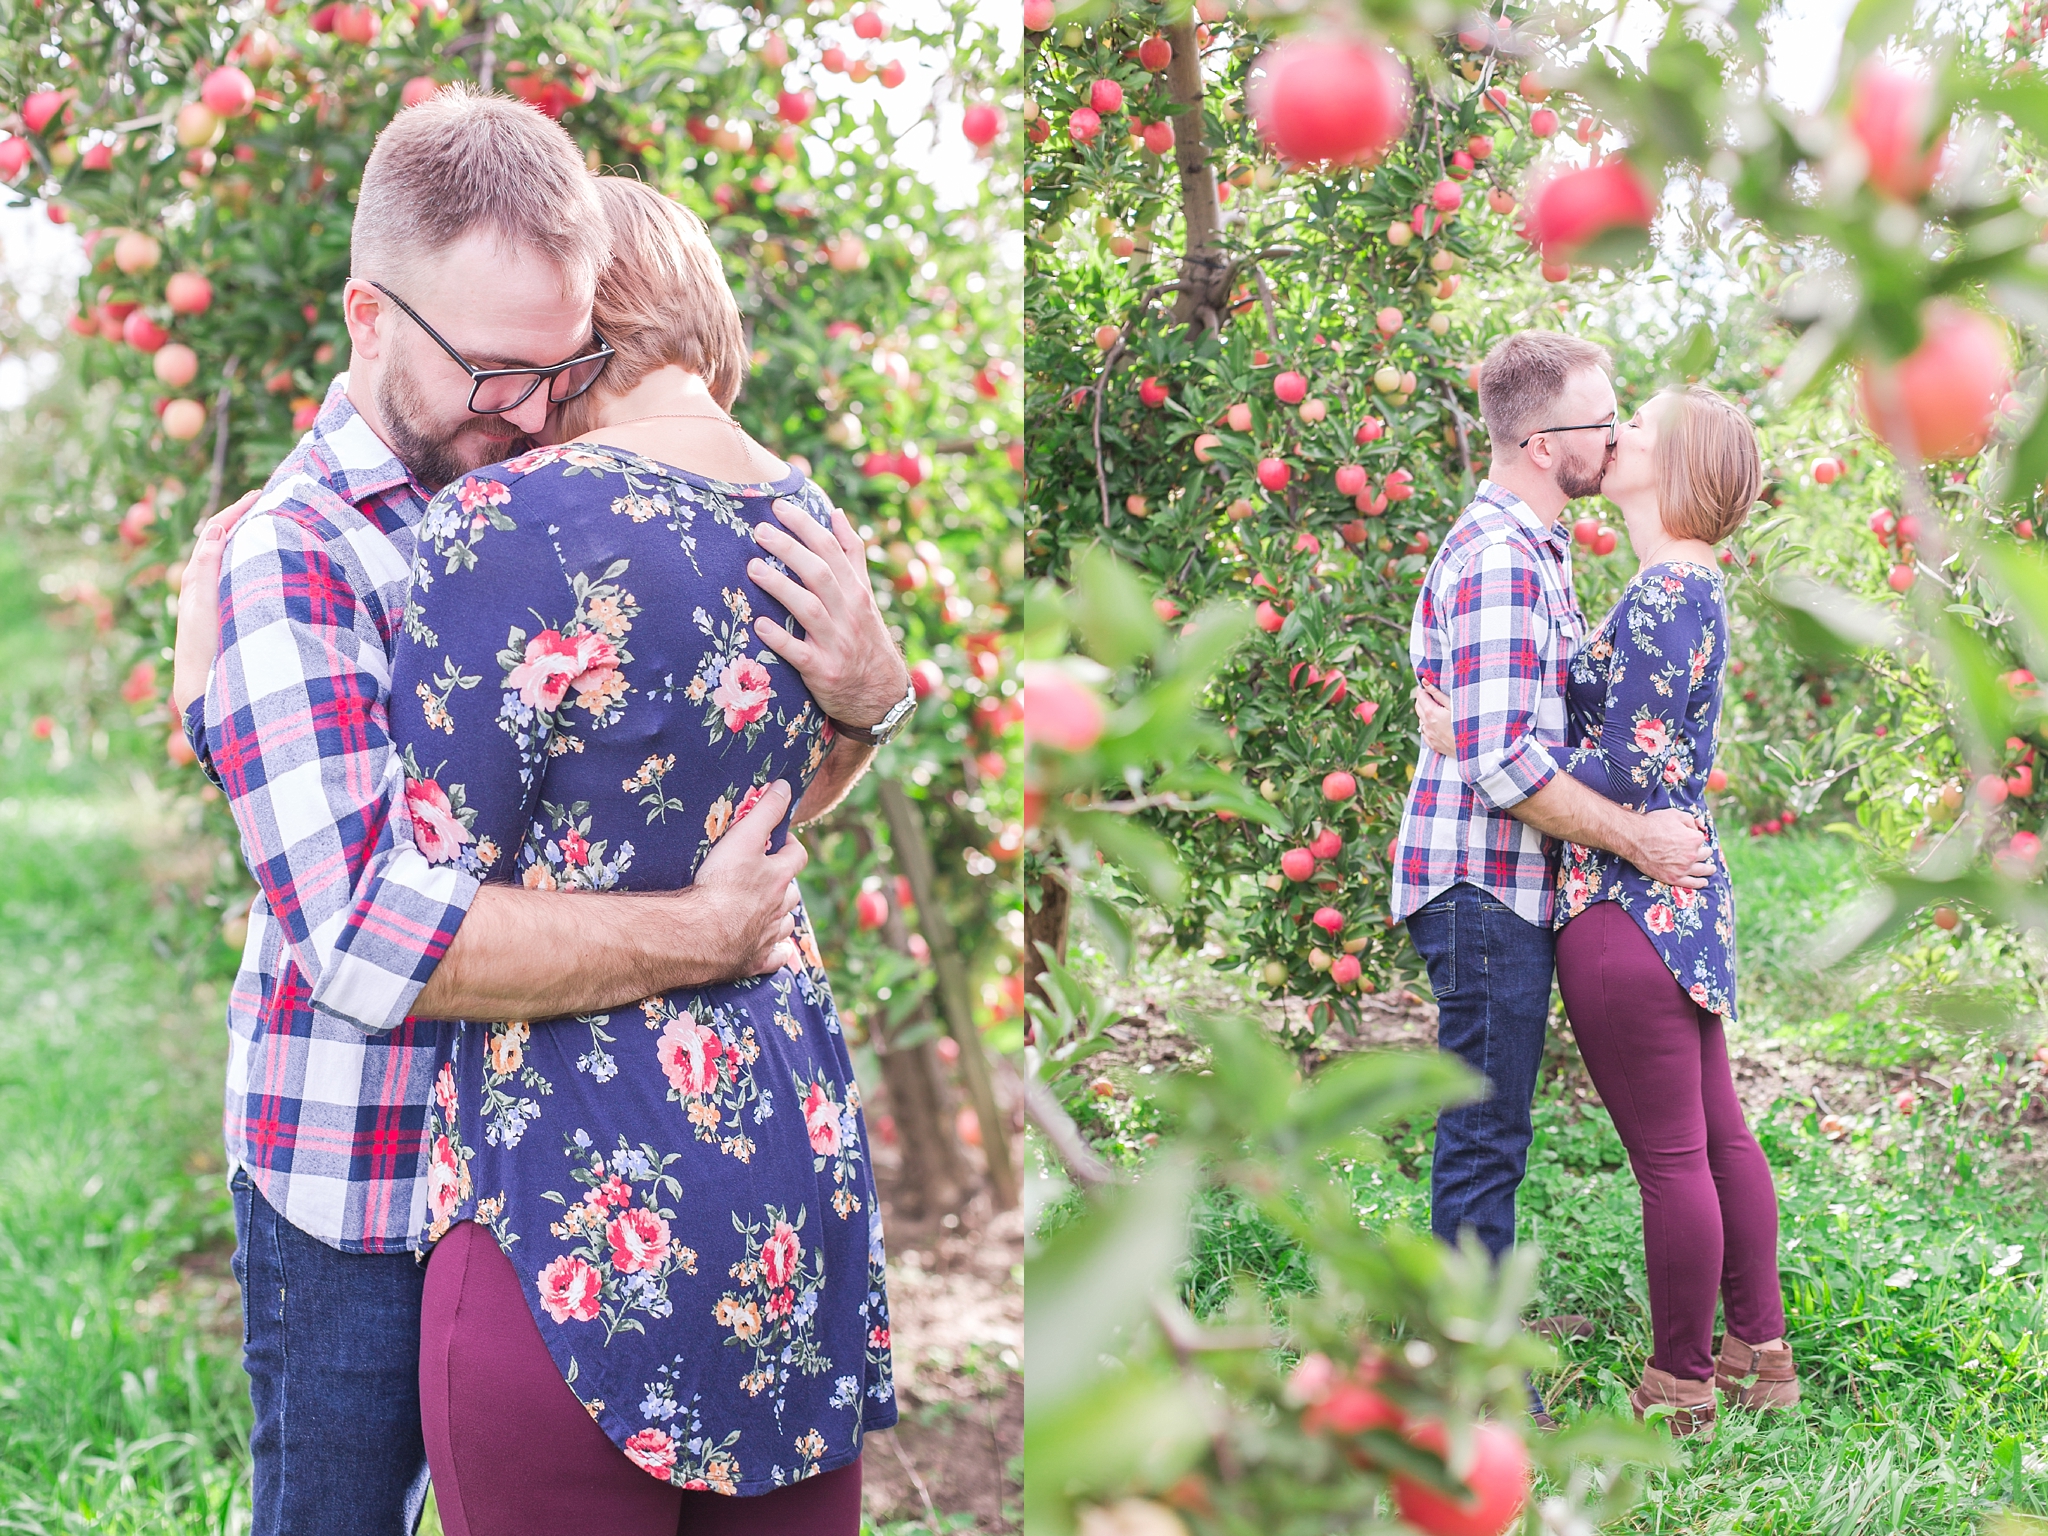 playful-fall-engagement-photos-at-hy's-cider-mill-ochard-in-bruce-township-michigan-by-courtney-carolyn-photography_0011.jpg